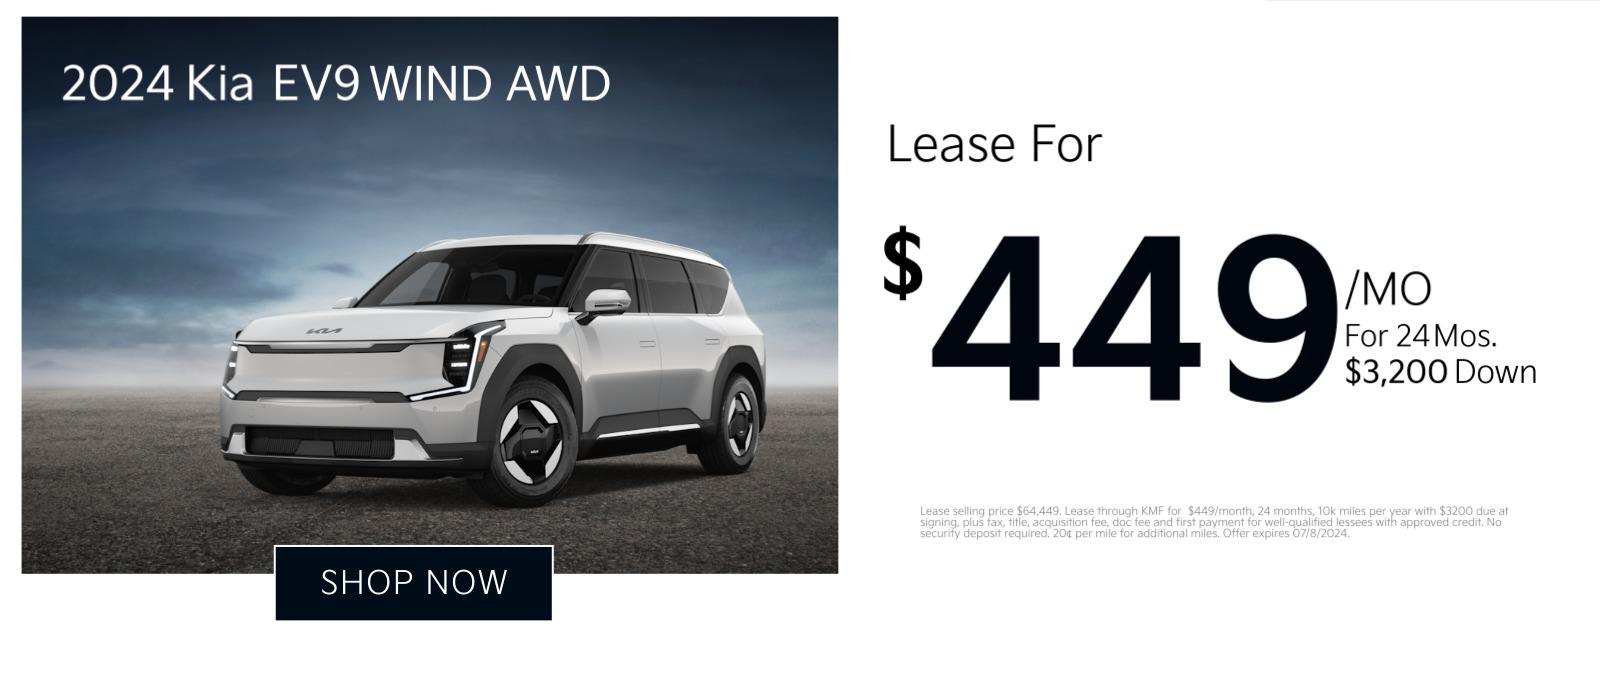 2024 Kia EV9 Wind AWD
Lease for
$449/mo
For 24 Months. $3,200 Down